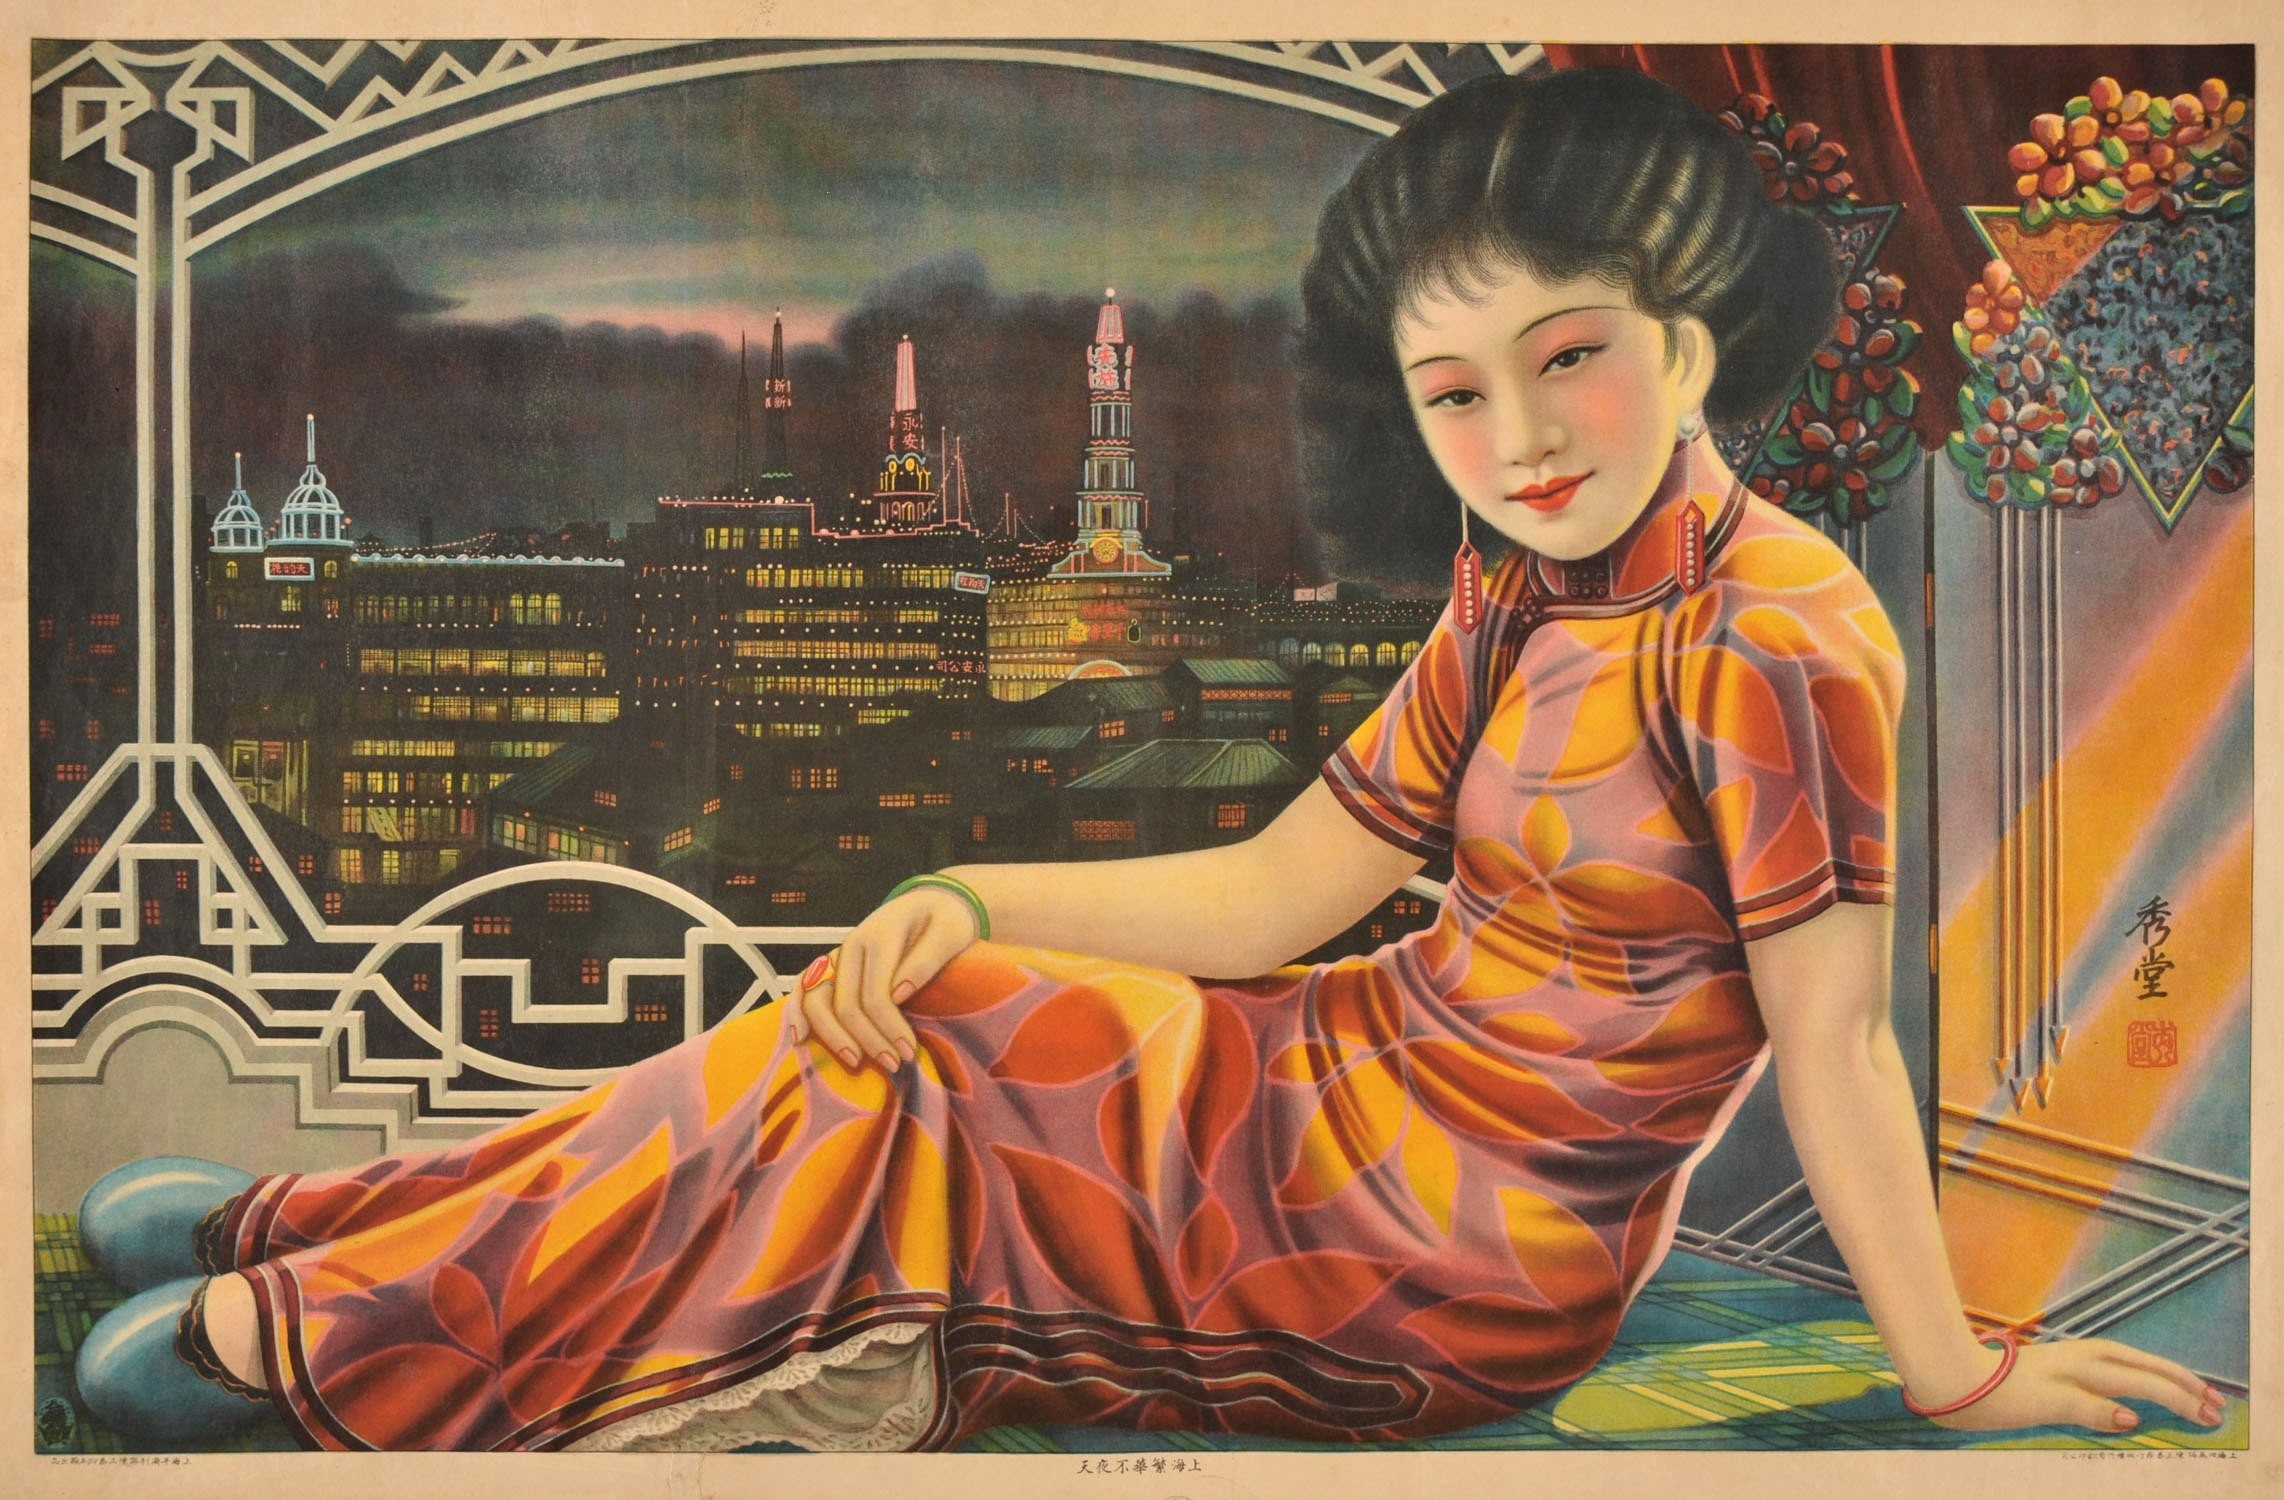 1930s Shanghai, the setting for The Dancing Girl & the Turtle, was an era of opium smoke, elaborate dance halls and glamorous women in cheongsam.